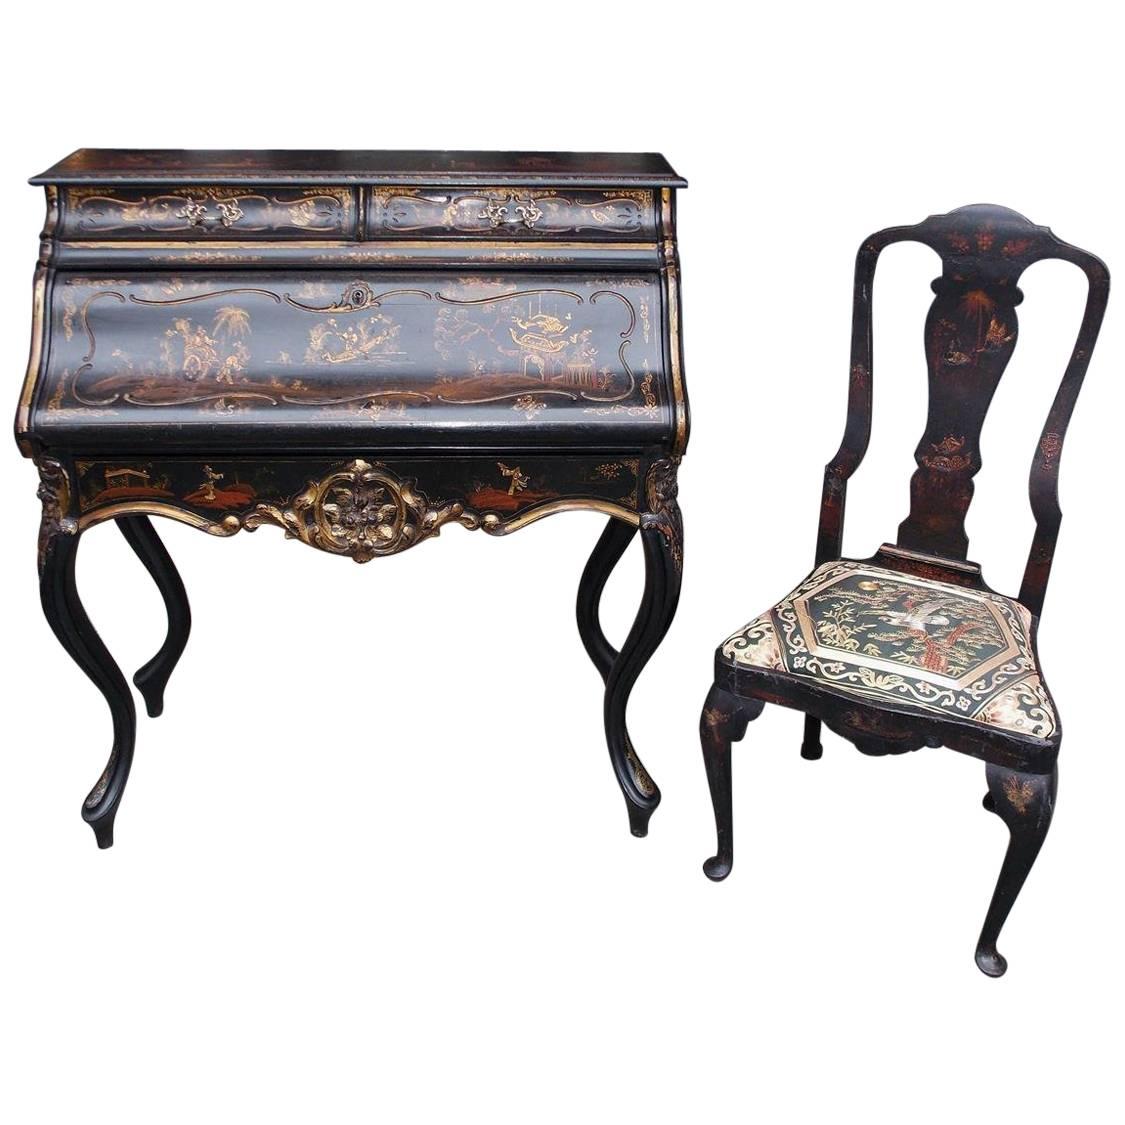 English Chinoiserie Black Lacquered and Gilt Desk with Side Chair, Circa 1840